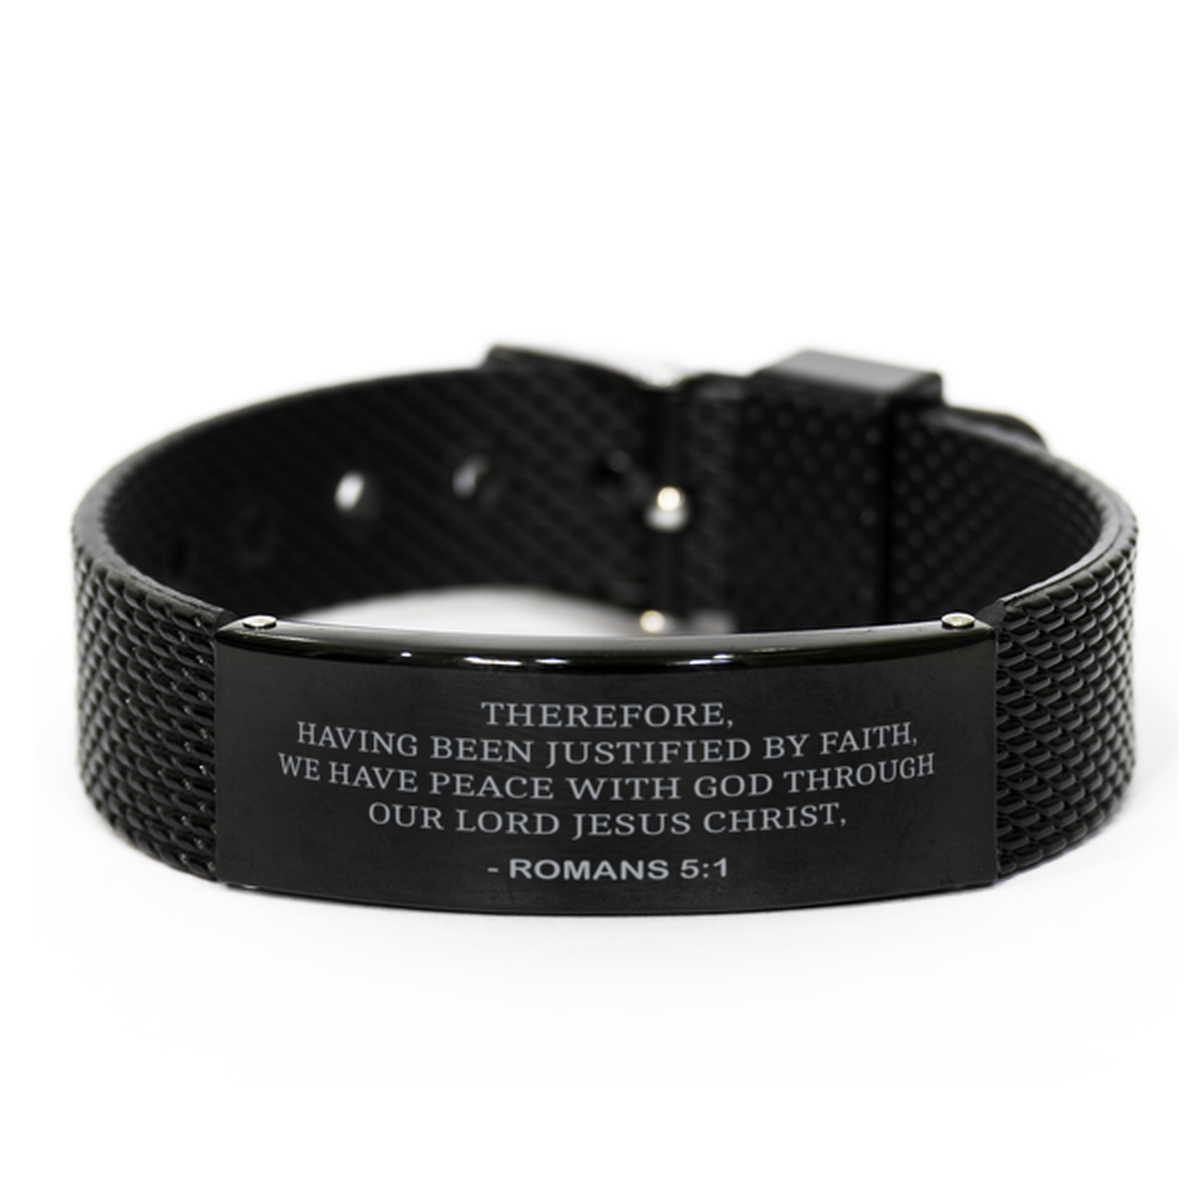 Christian Black Bracelet,, Romans 5:1 Therefore, Having Been Justified By Faith, We, Motivational Bible Verse Gifts For Men Women